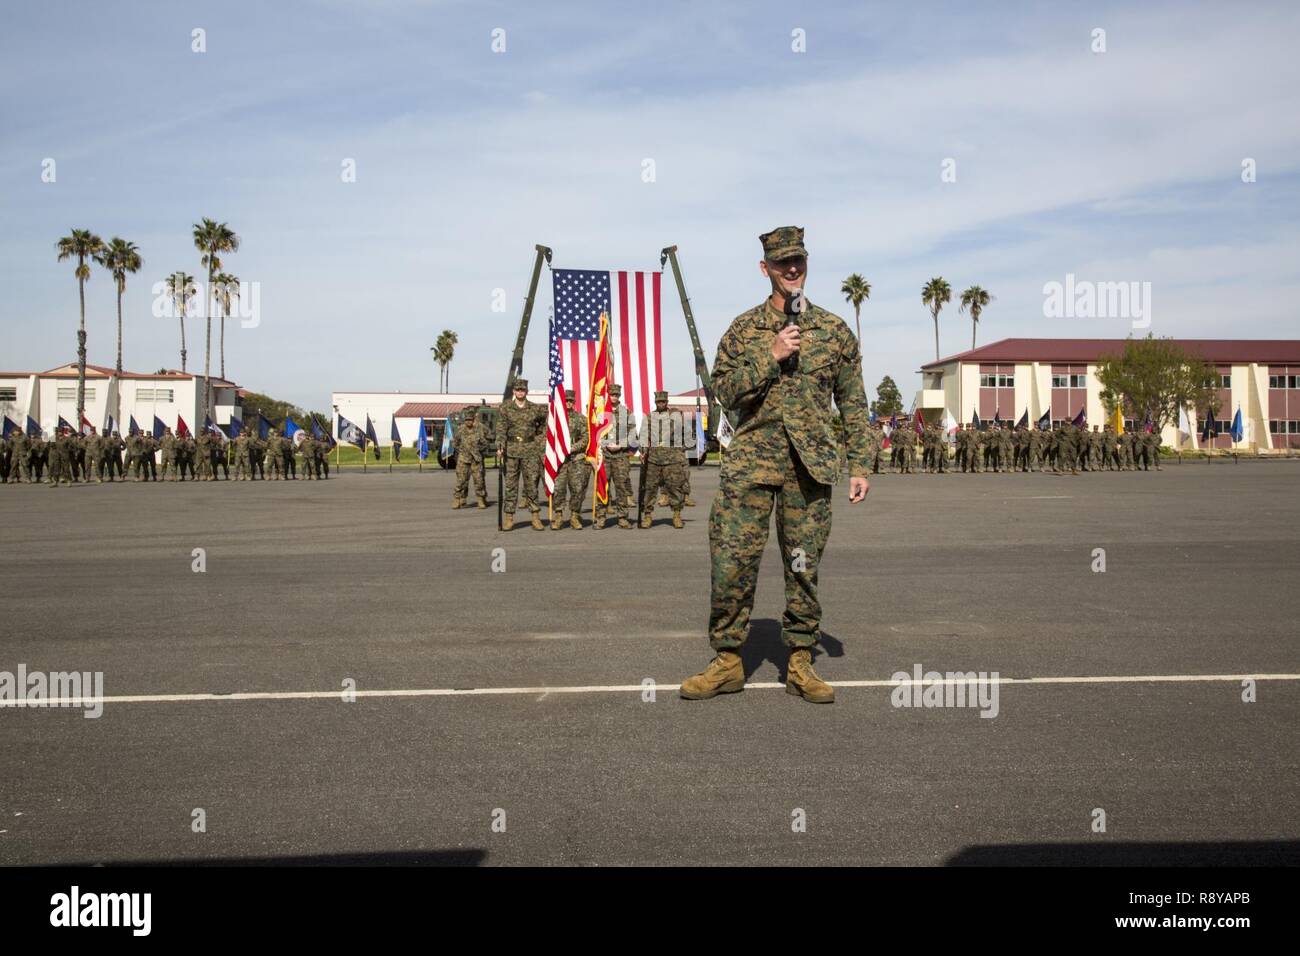 U.S. Marine Corps Col. Chandler Nelms, commanding officer of the 13th Marine Expeditionary Unit, gives his remarks during a relief and appointment ceremony at the Del Mar parade deck aboard Marine Corps Base Camp Pendleton, Calif., March 10, 2017. The ceremony was held to post Sgt. Maj. Brian Priester, relieve and retire Sgt. Maj. William Slade after 30 years of faithful military service. Stock Photo